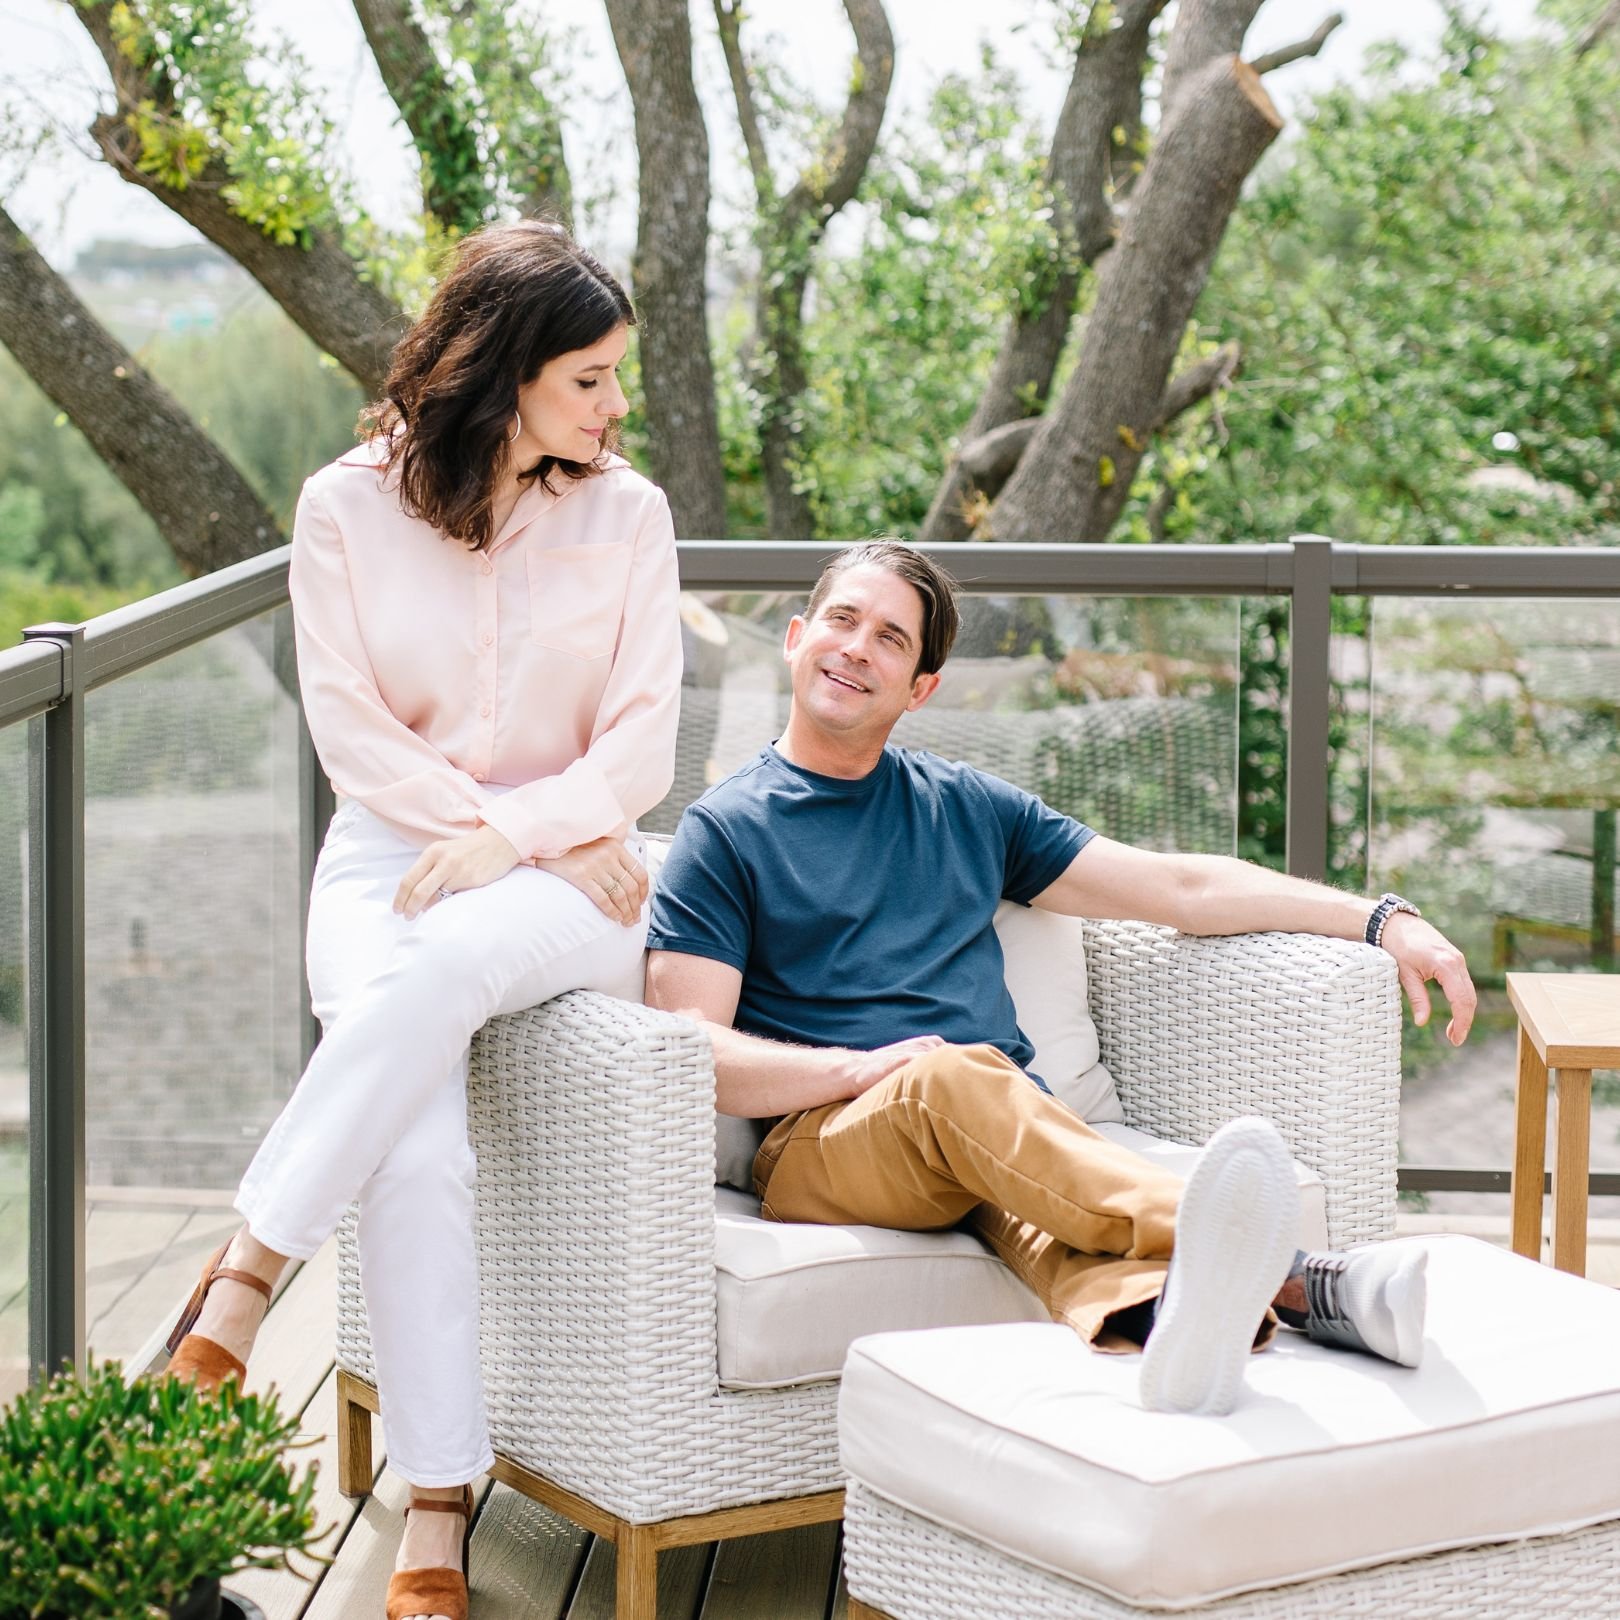 Spring in Texas is the perfect time for Nathan and I to move our morning meetings to the patio. How about you? Do you ever get to take your work outside?

#teachers #teacherappreciation #teacherappreciationday #teachergiveaway #giveaway #agre #kateas